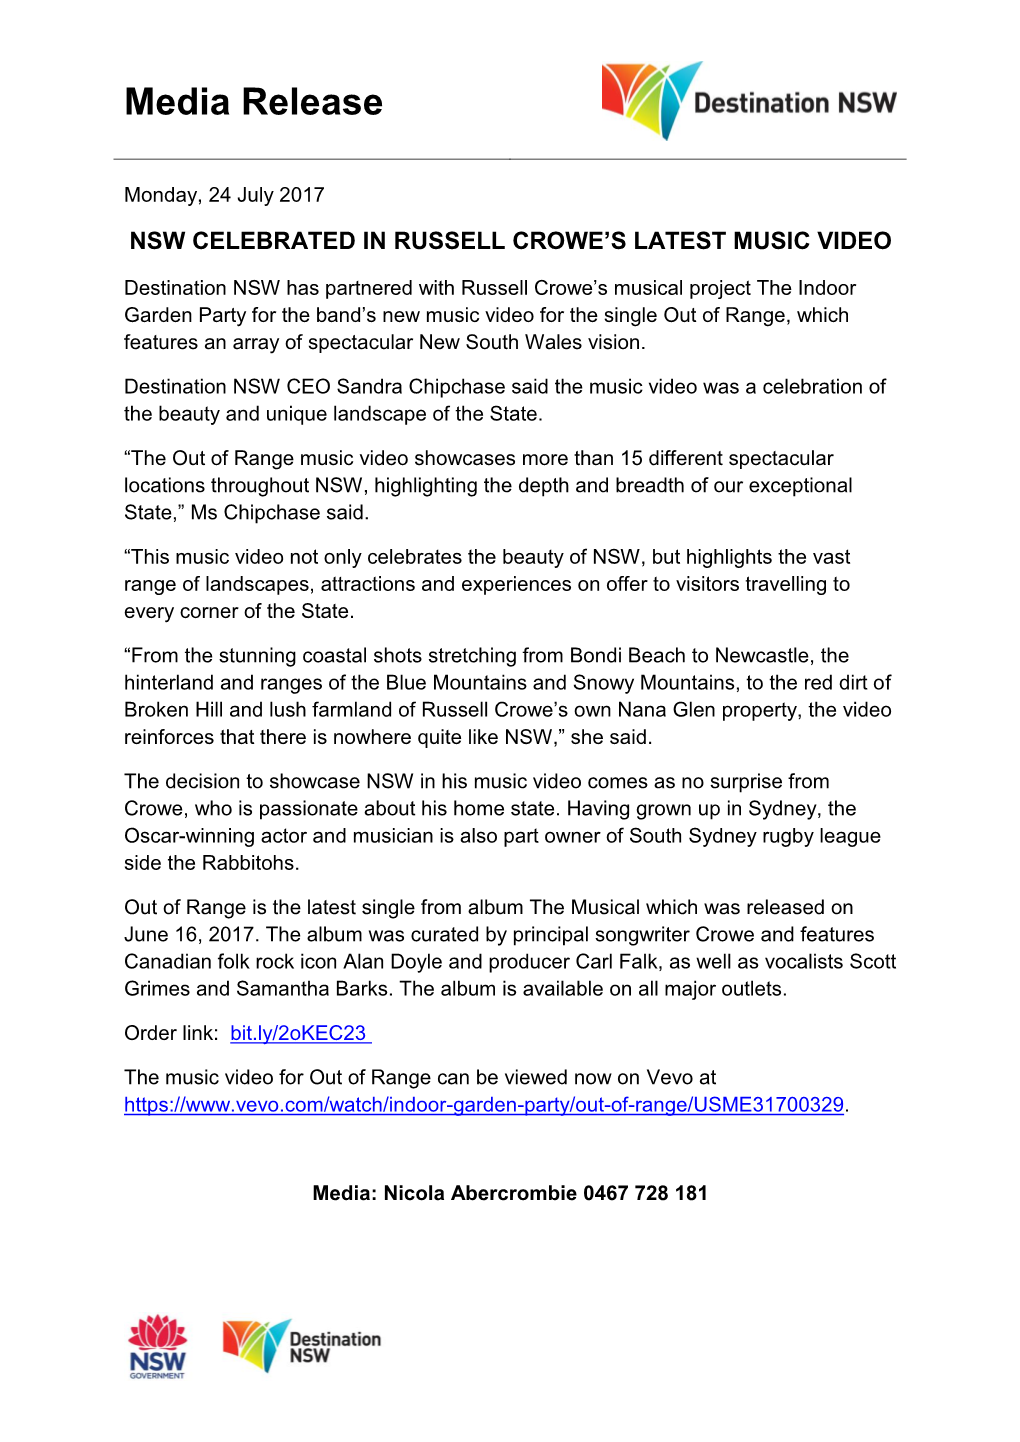 NSW Celebrated in Russell Crowe's Latest Music Video